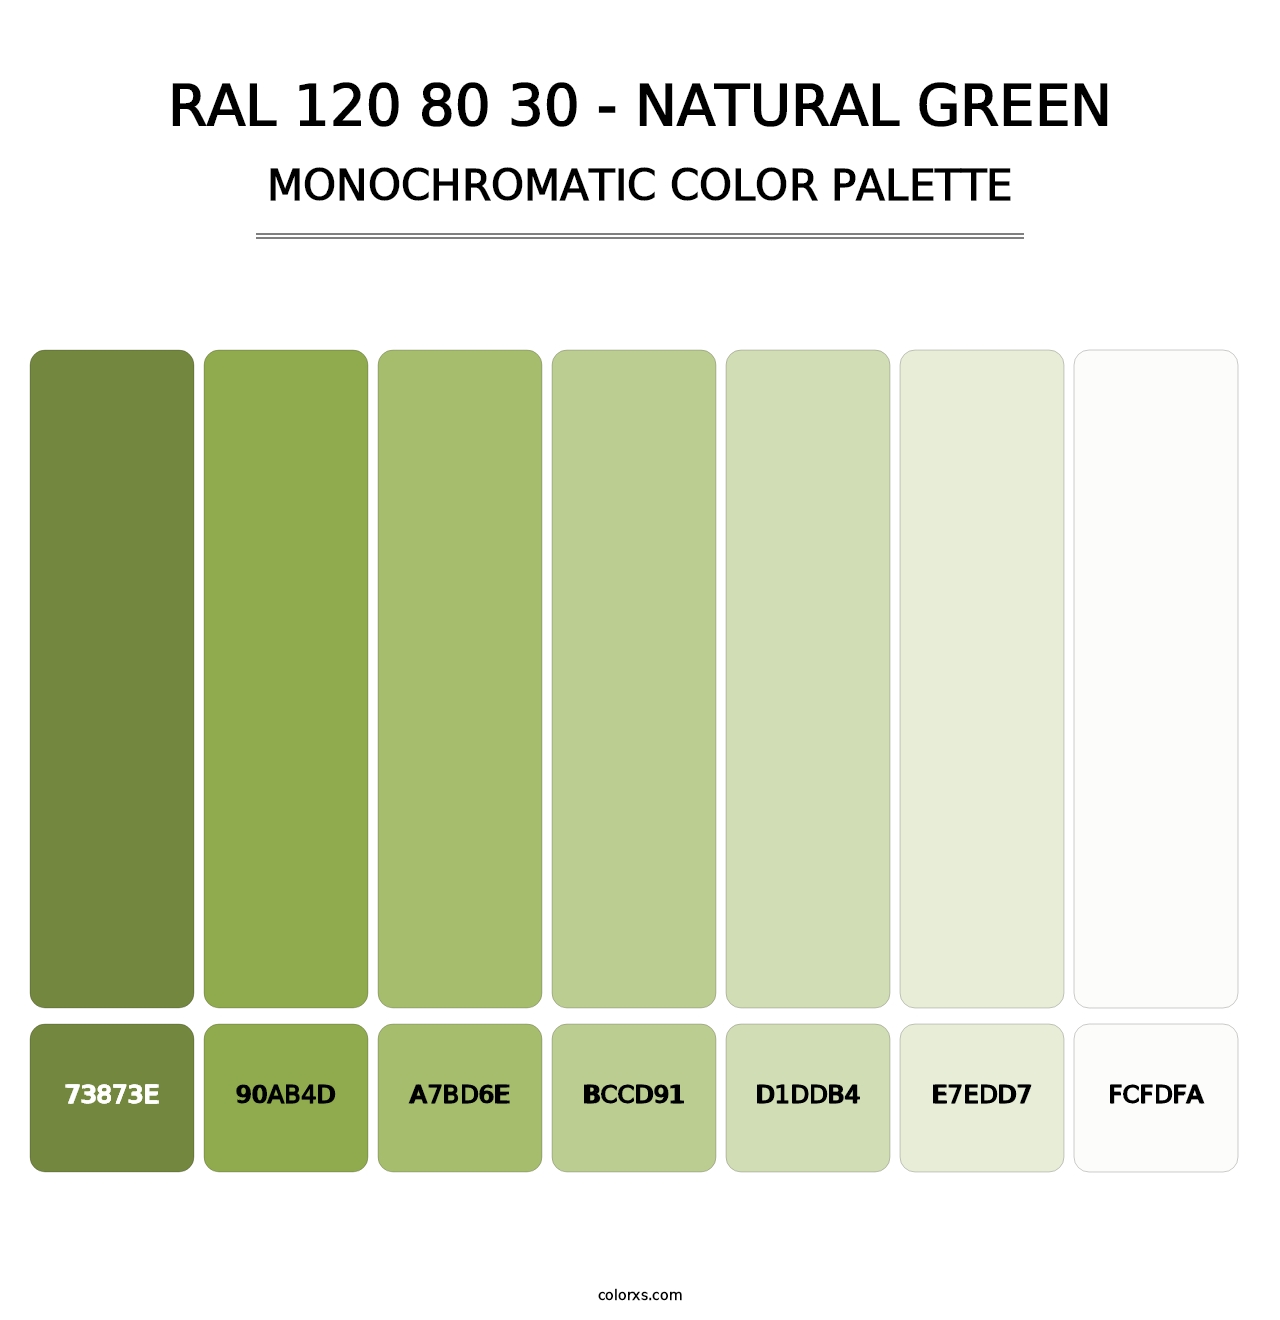 RAL 120 80 30 - Natural Green - Monochromatic Color Palette